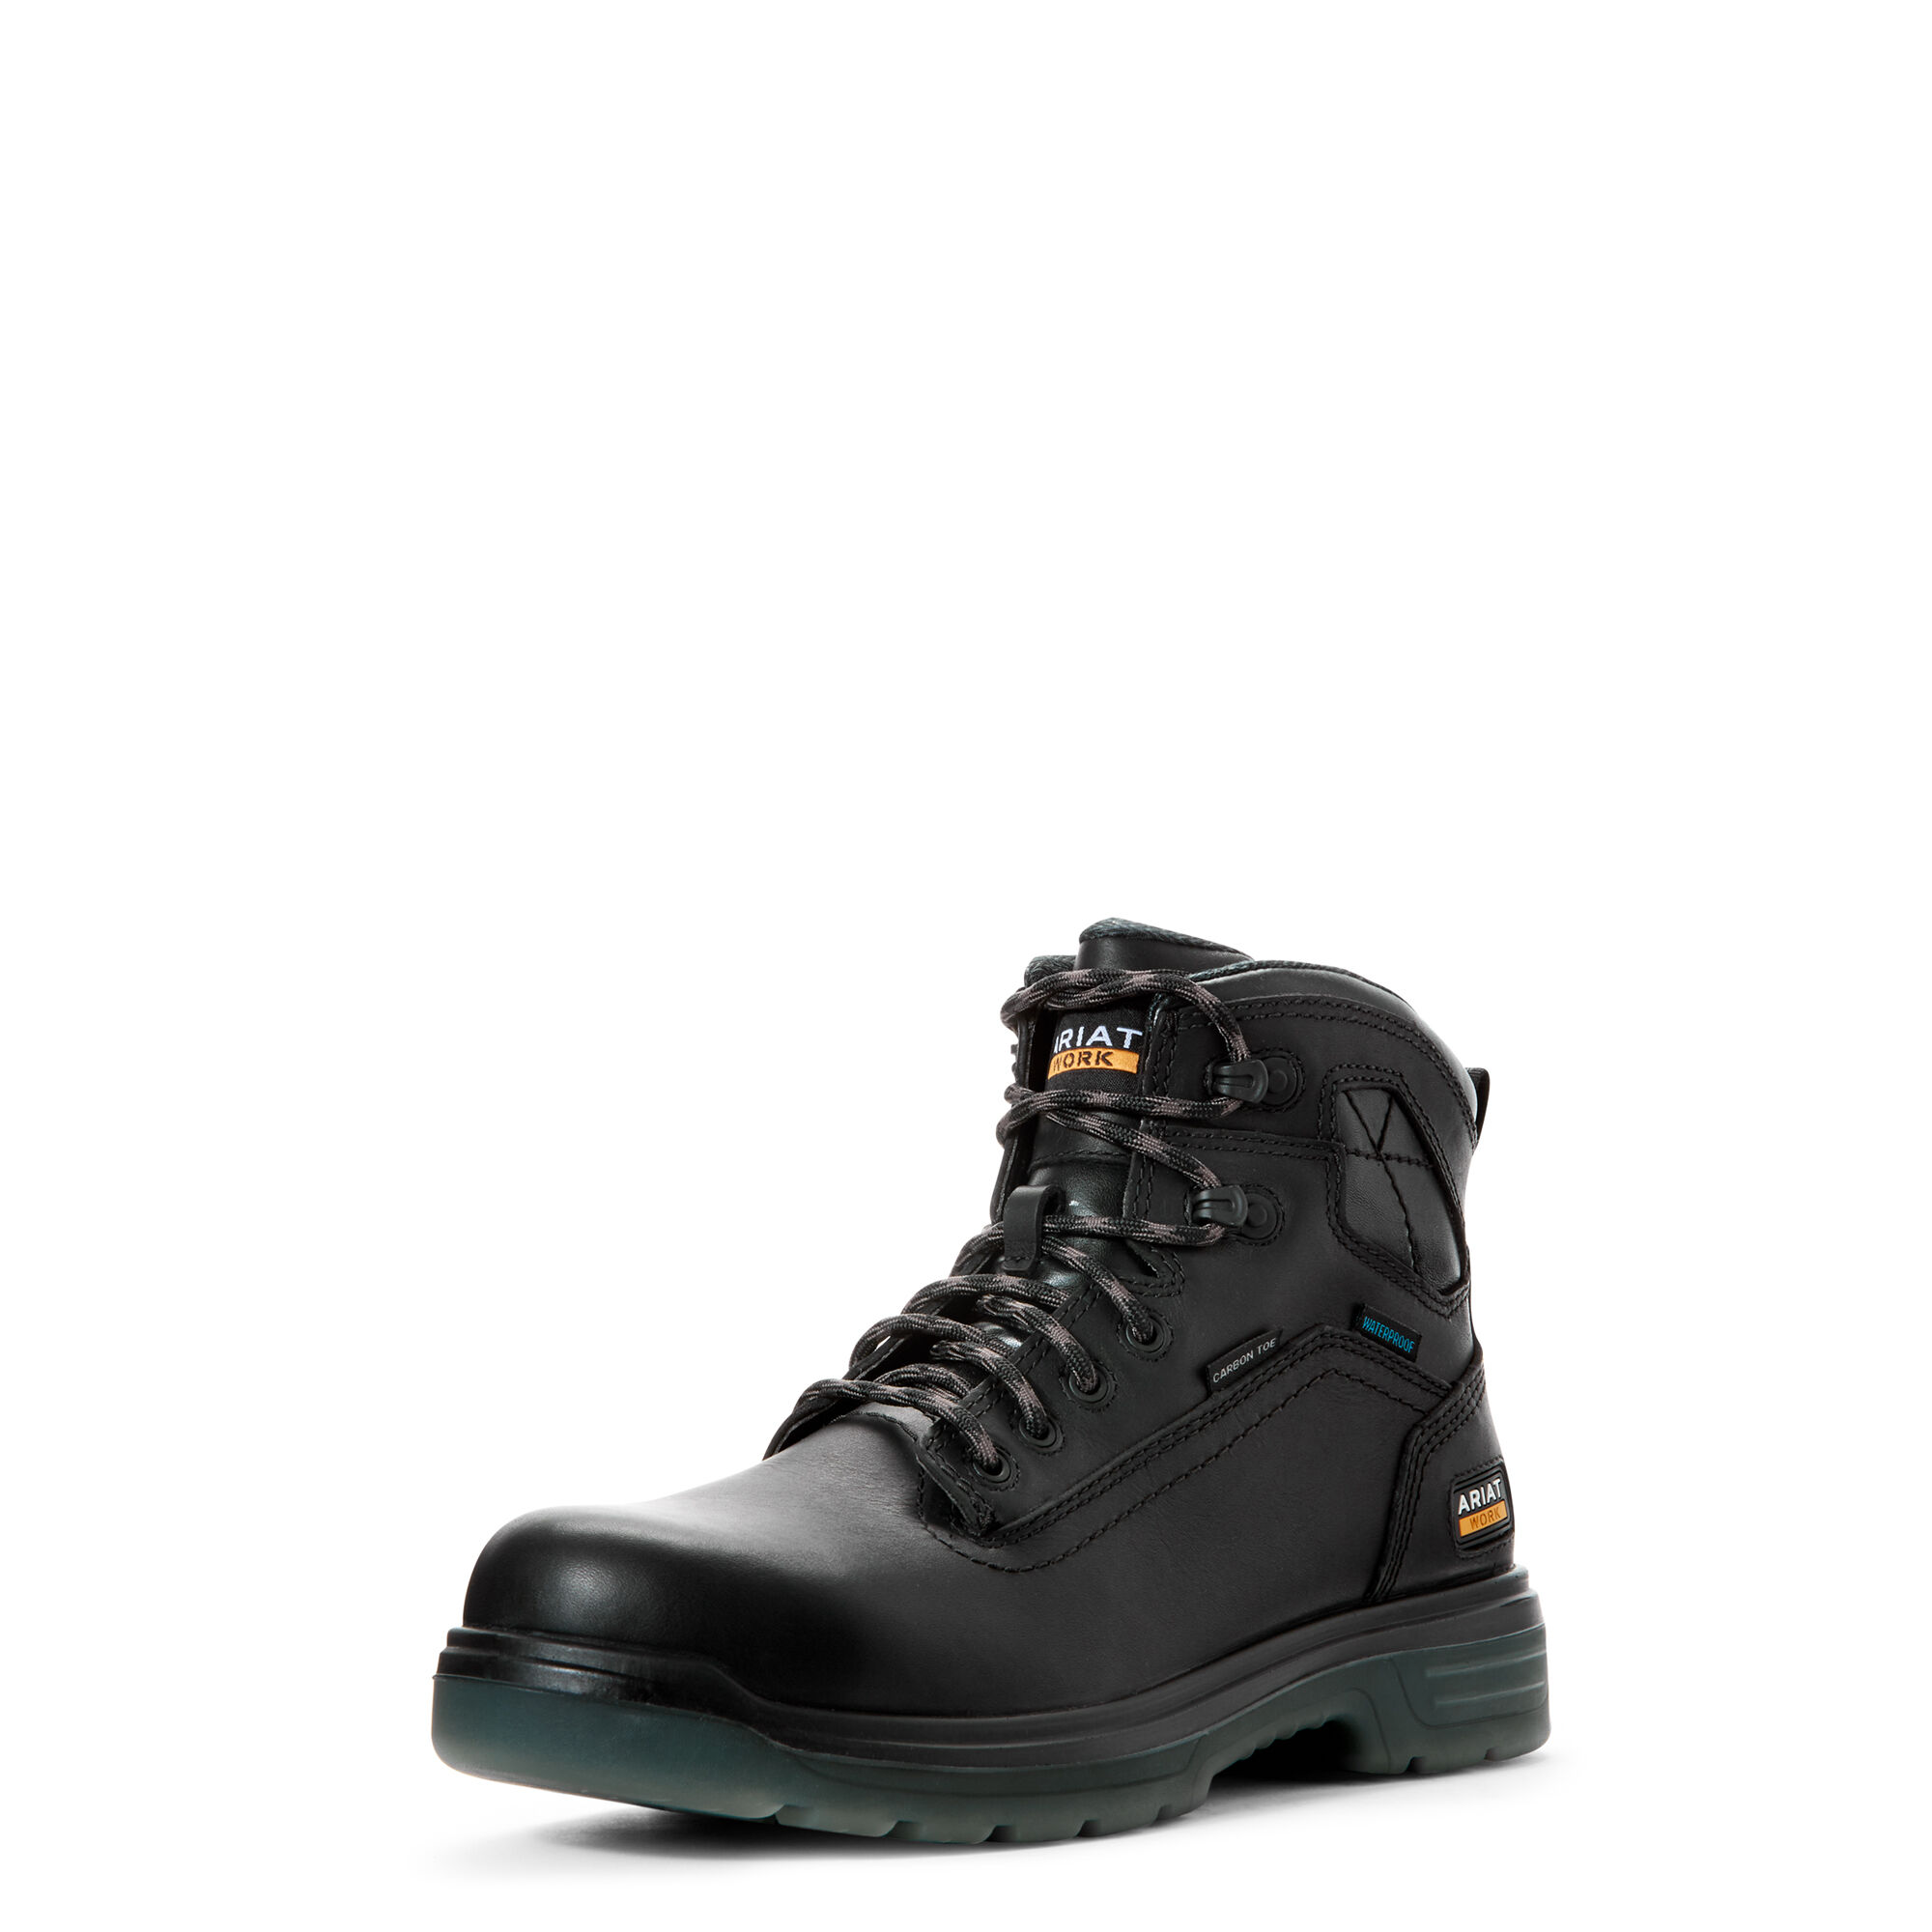 men's work boots on clearance